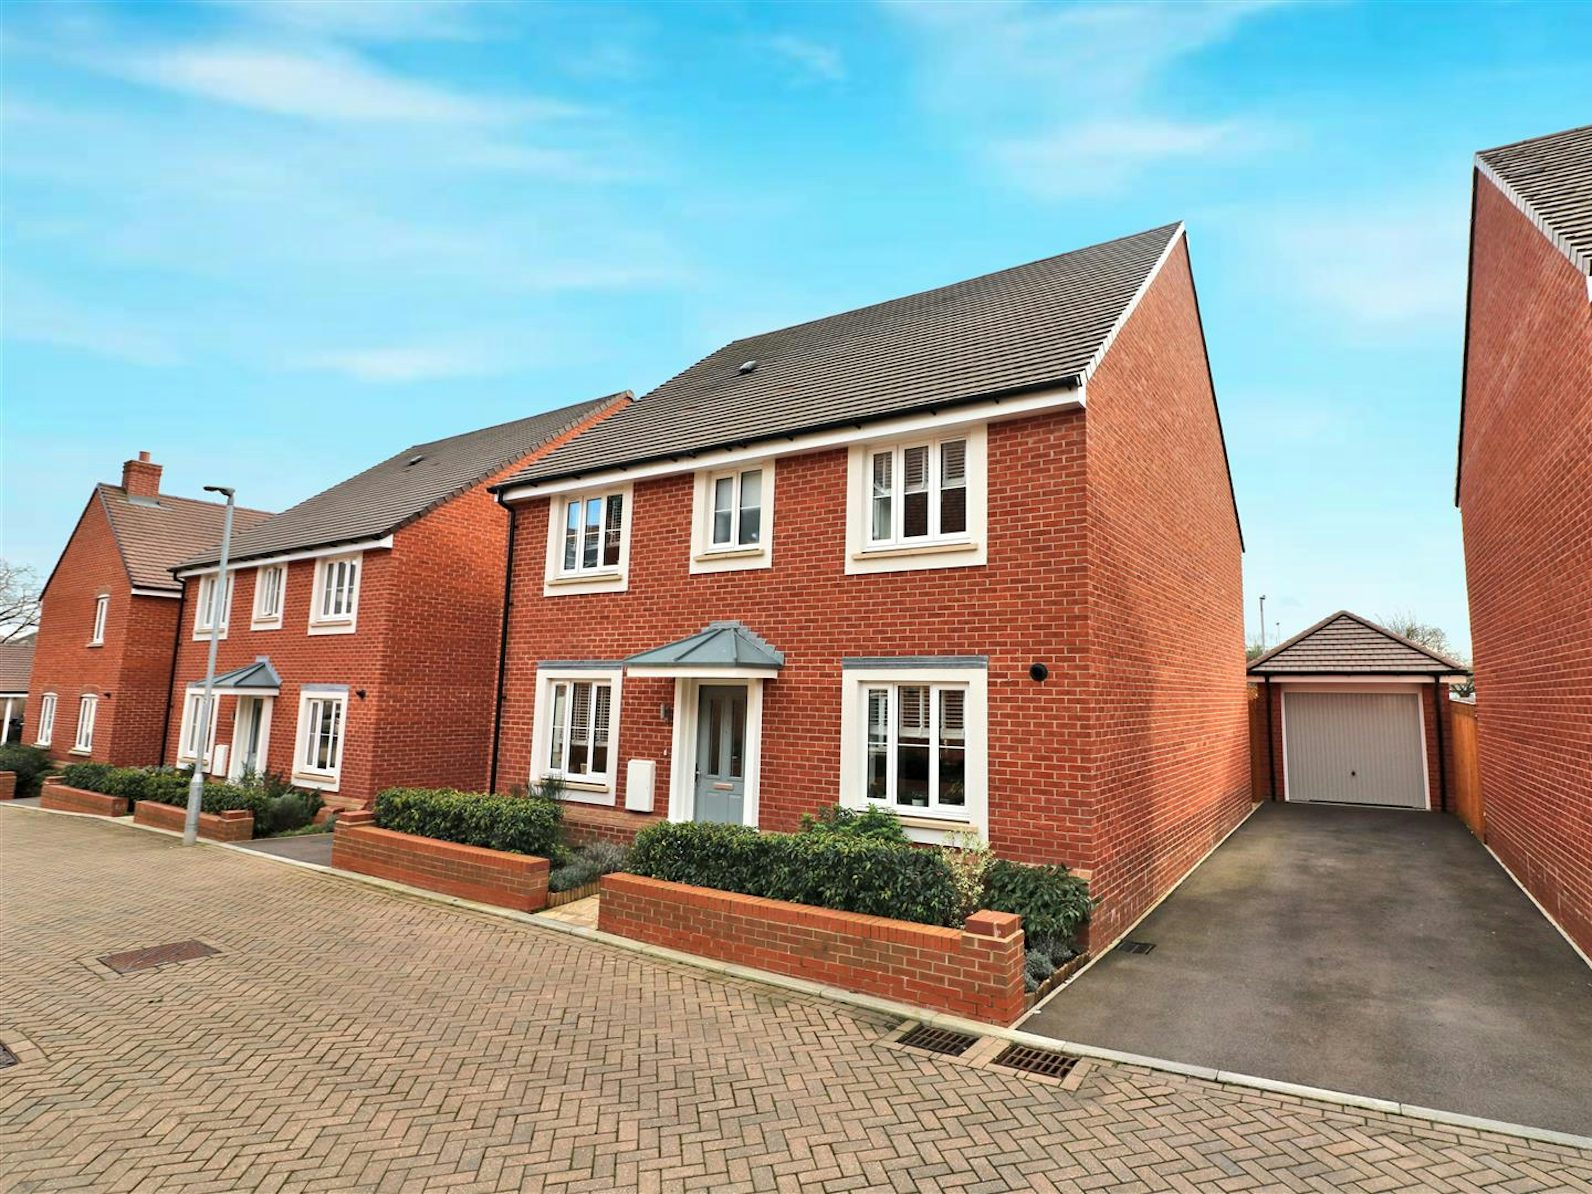 Detached house for sale on Creamery Close Woolmer Green, Knebworth, SG3